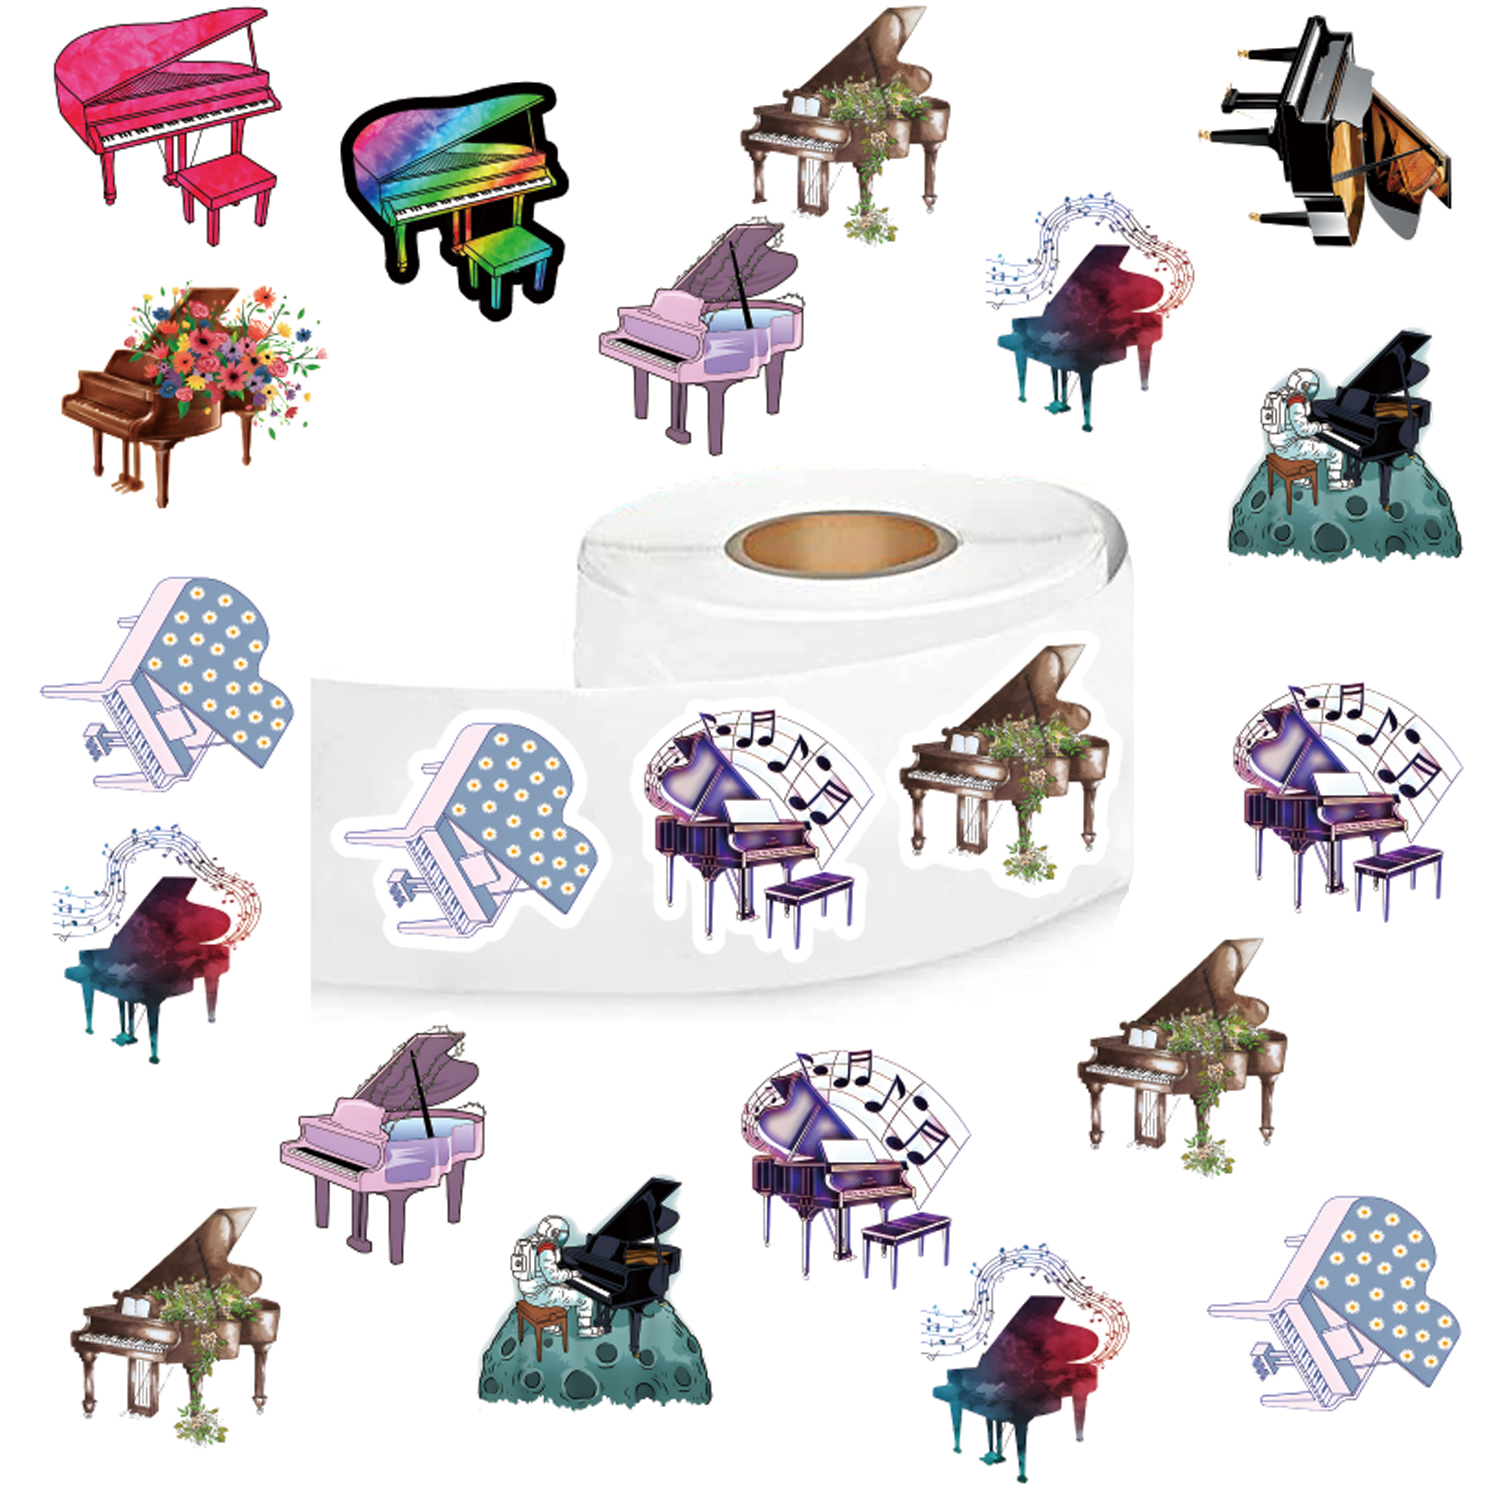 

500pcs Piano Stickers, Retro Aesthetics Decals Rolls Self Adhesive Seals For Scrapbooking Cards Envelopes Handmade, Gifts For Party Supply (1 Inch Labels/ 10 Patterns )